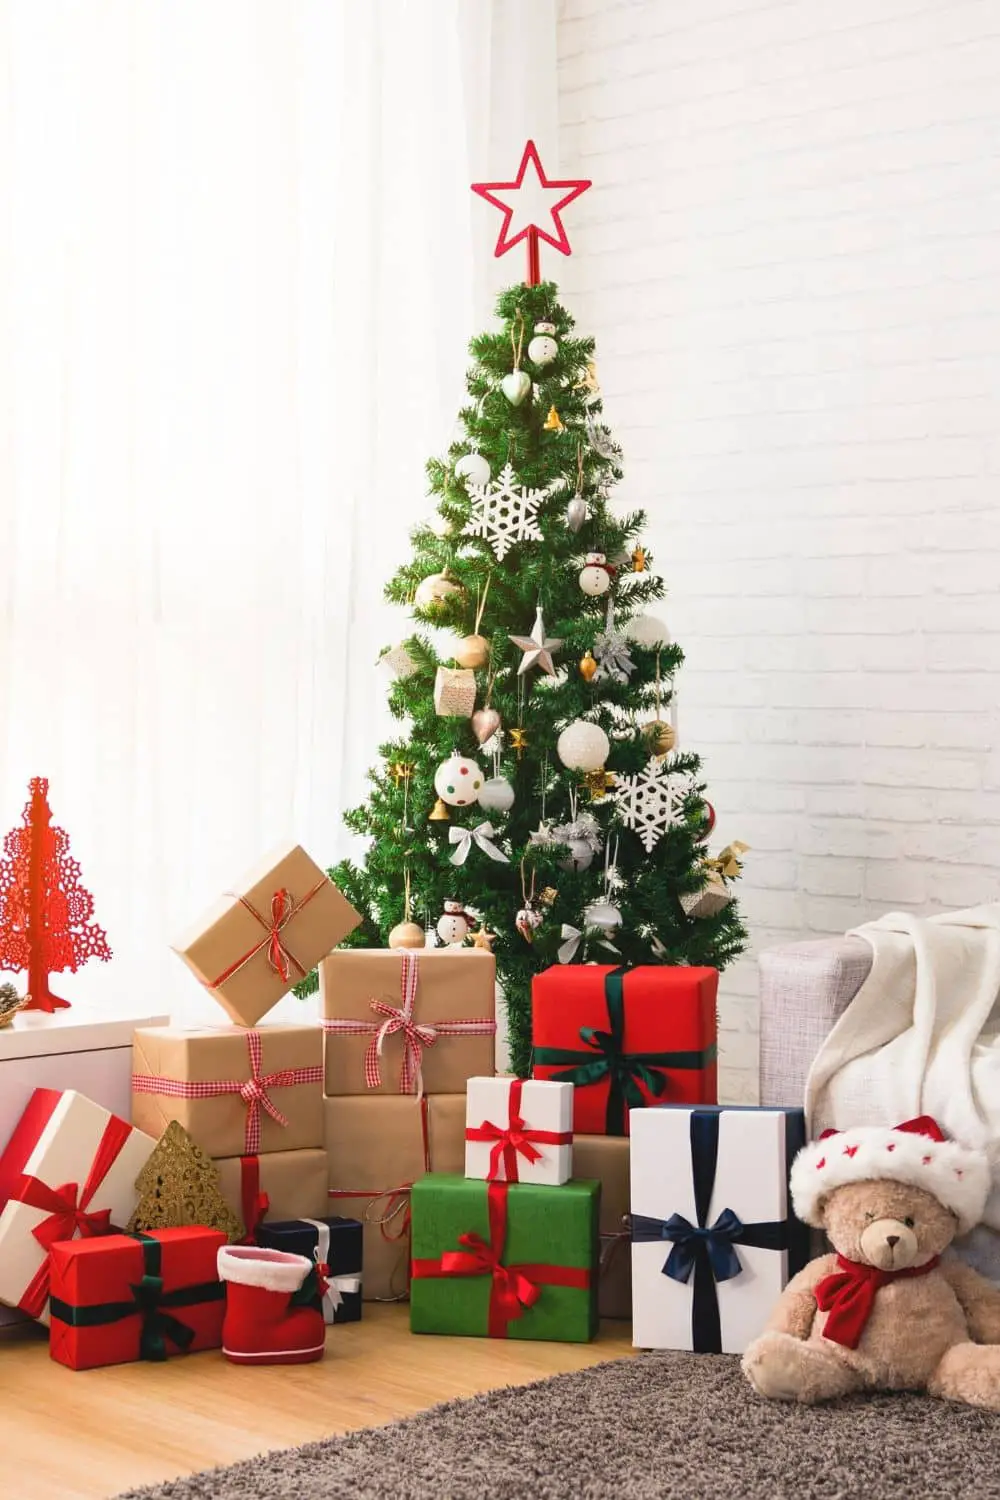 How to decorate and care for your christmas tree